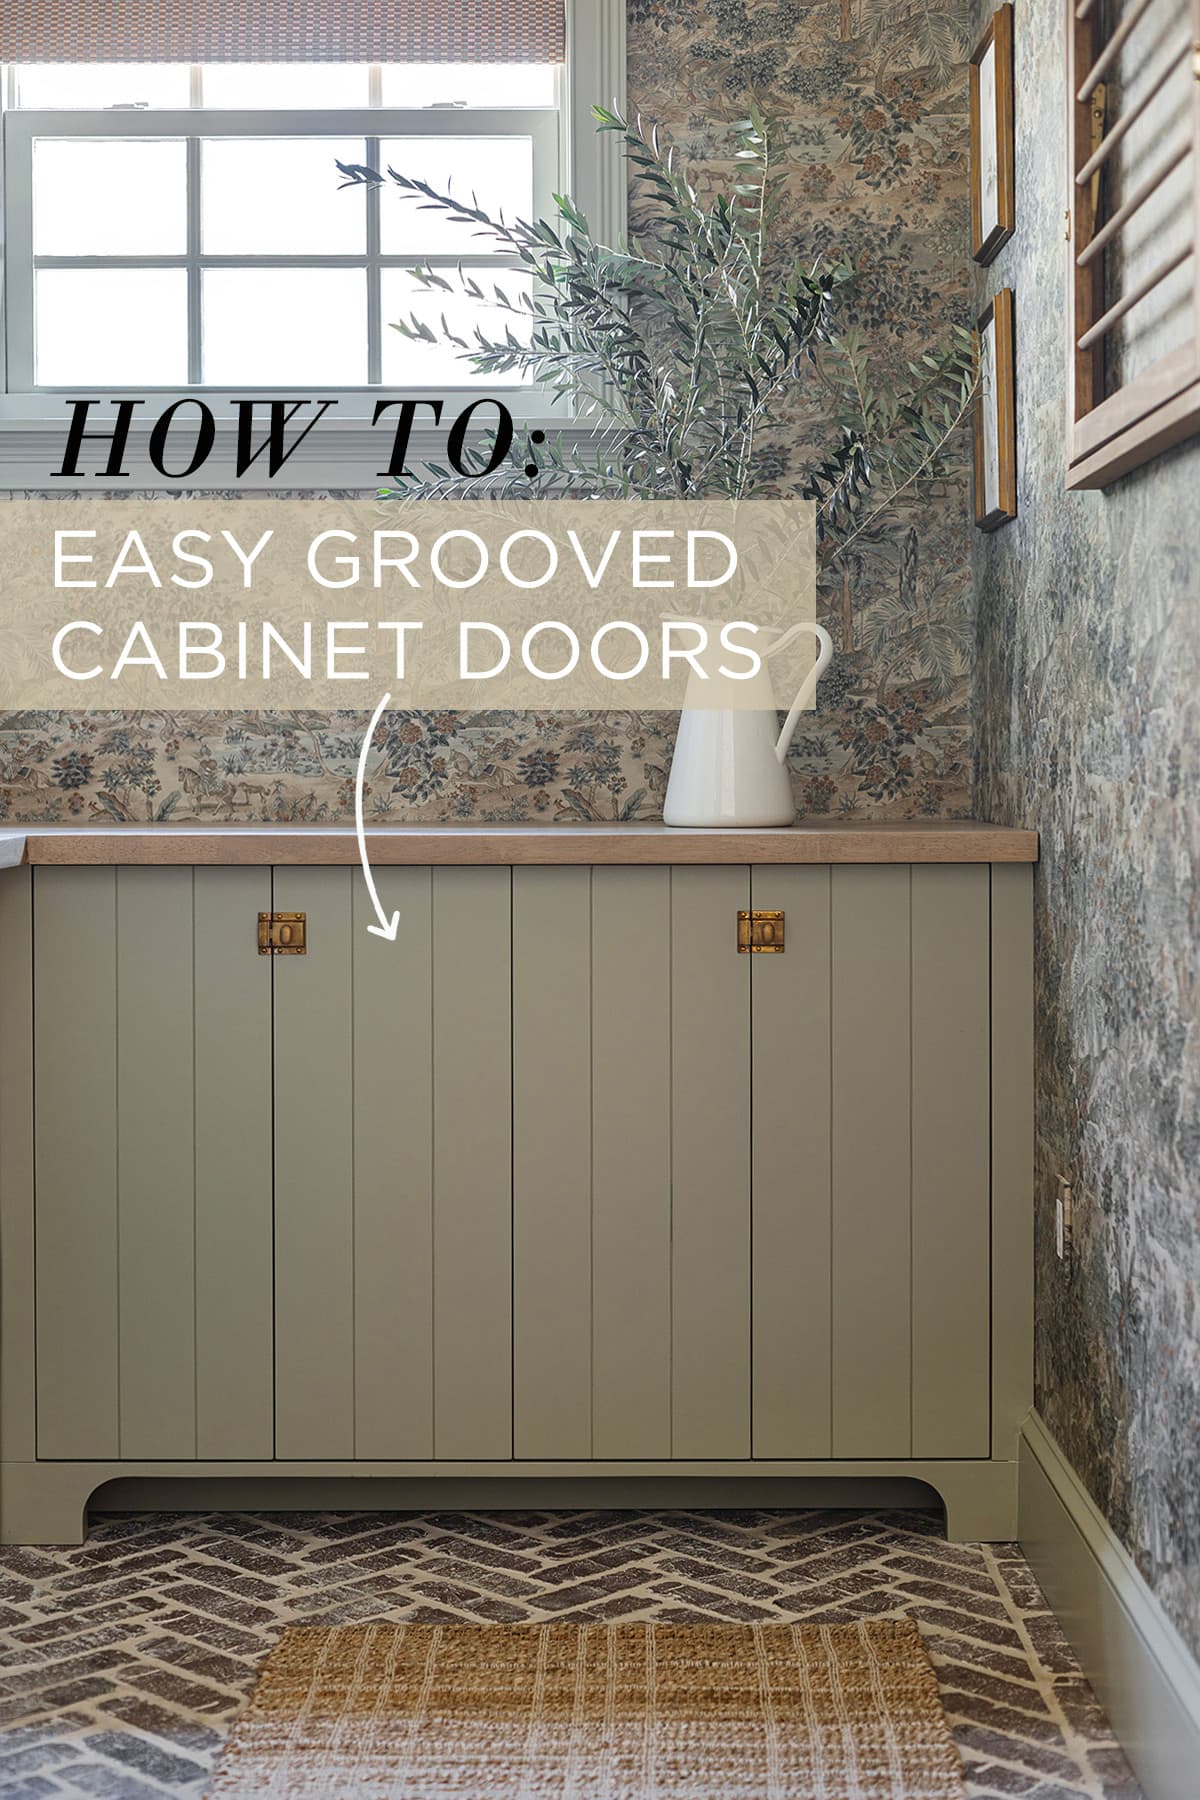 how to make easy grooved cabinet doors tutorial